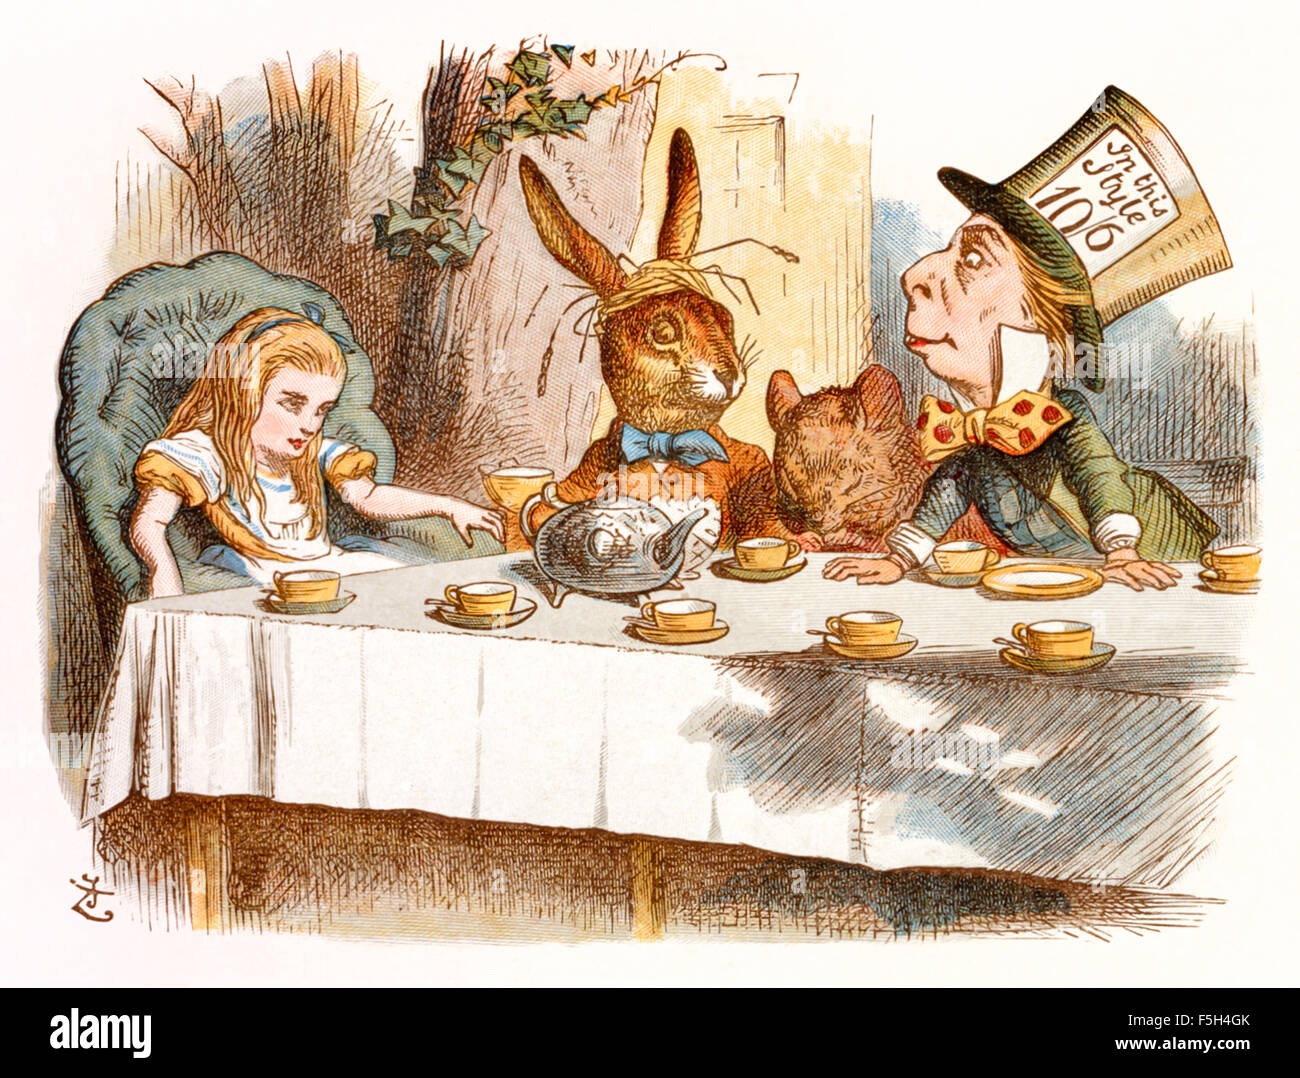 The Mad Tea Party, from 'The Nursery “Alice'', an shortened adaptation of ‘Alice’s Adventures in Wonderland’ aimed at under-fives written by Lewis Carroll (1832-1898) himself. This edition contains 20 selected illustrations by Sir John Tenniel (1820-1914) from the original book which were enlarged and coloured by Emily Gertrude Thomson (1850-1929). See description for more information. Stock Photo